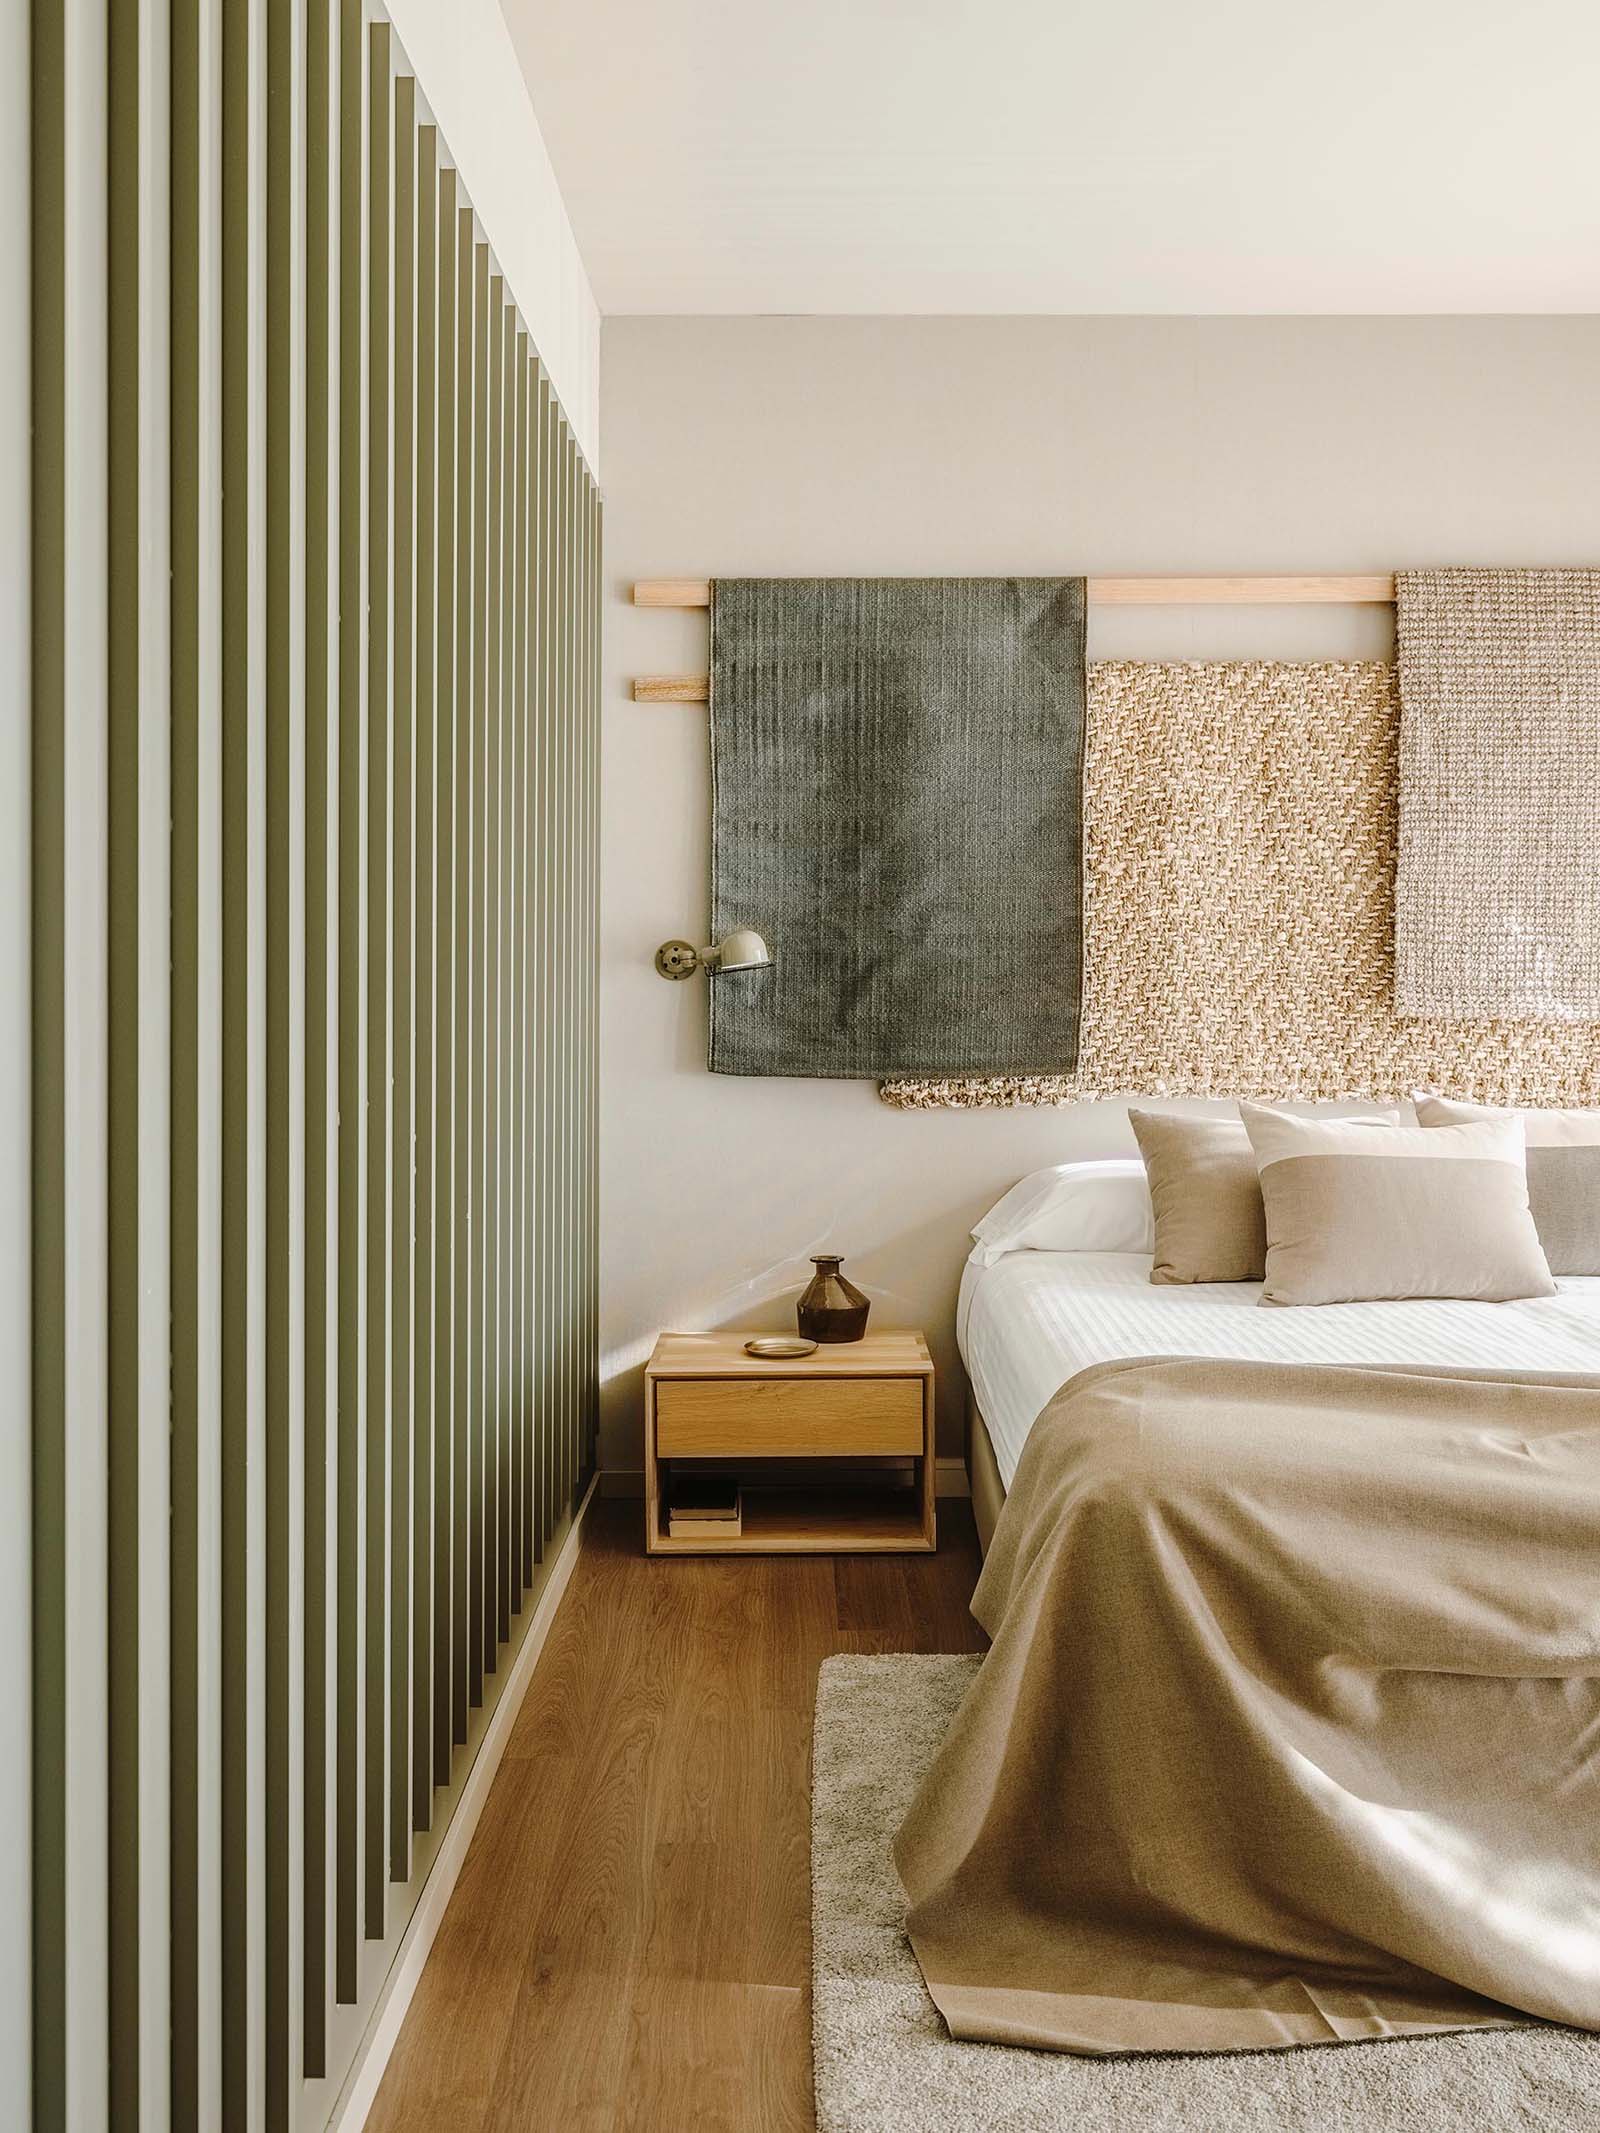 Wood lengths with draped fabric creates a unique wall decor installation in a bedroom